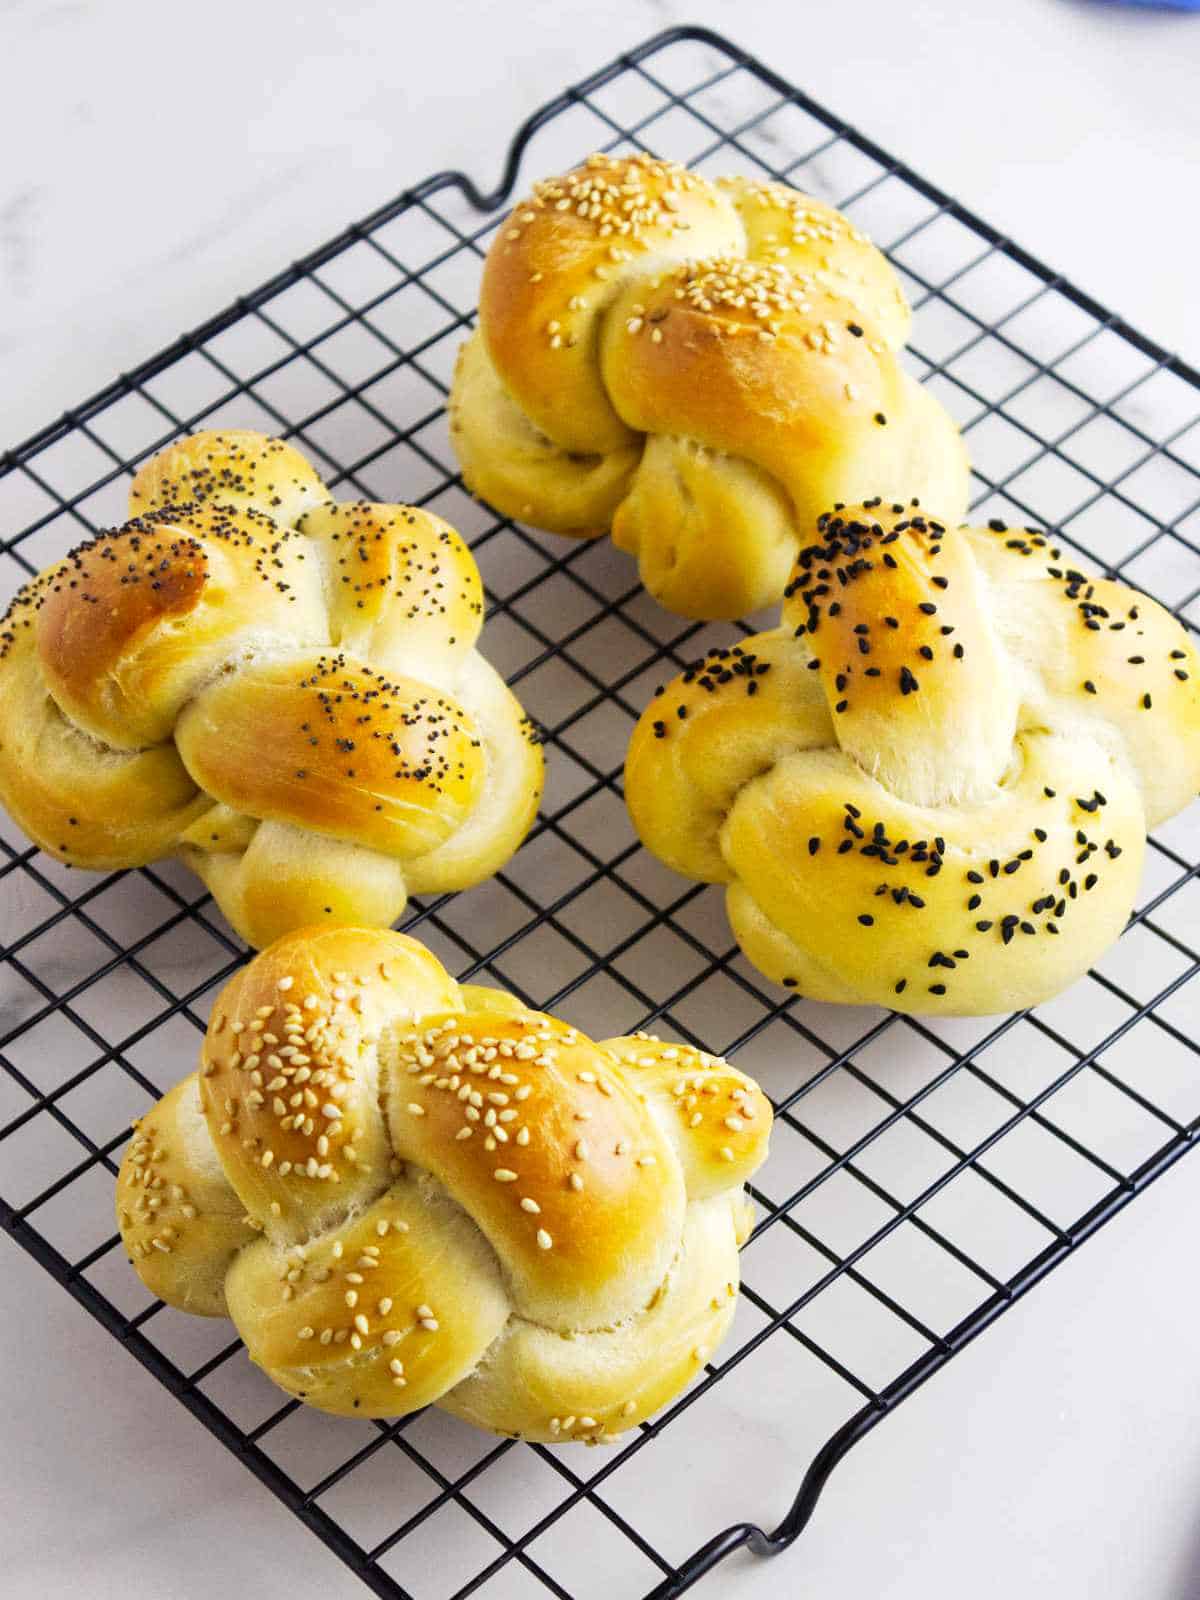 golden brown challah rolls fresh from the oven on a cooling rack.